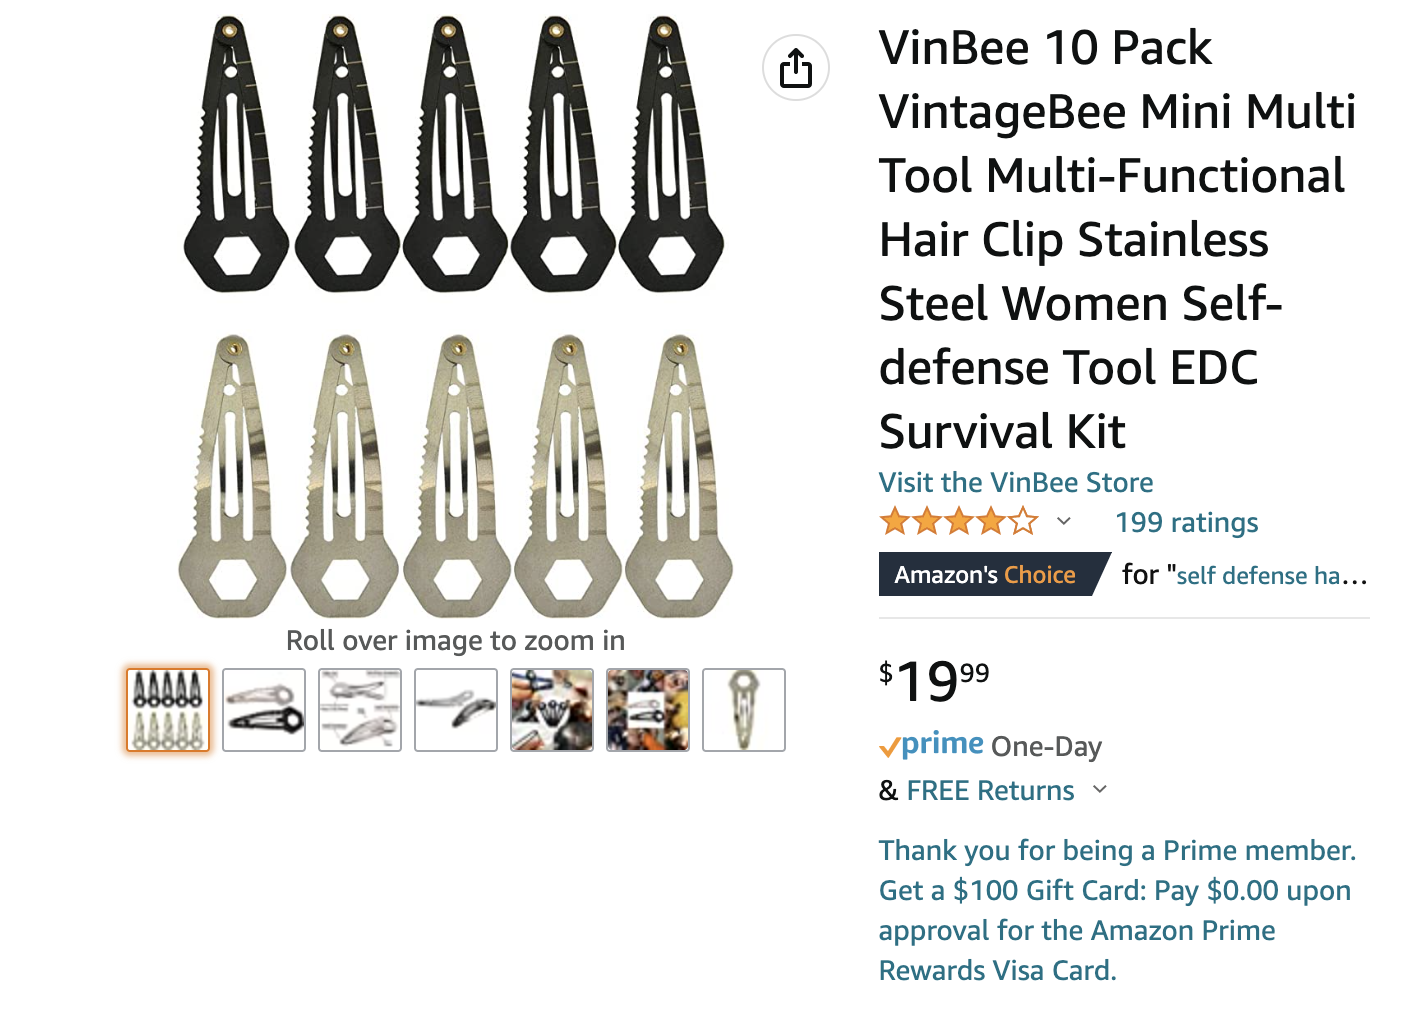 the listing showing the 10 different clips and the price at $19.99